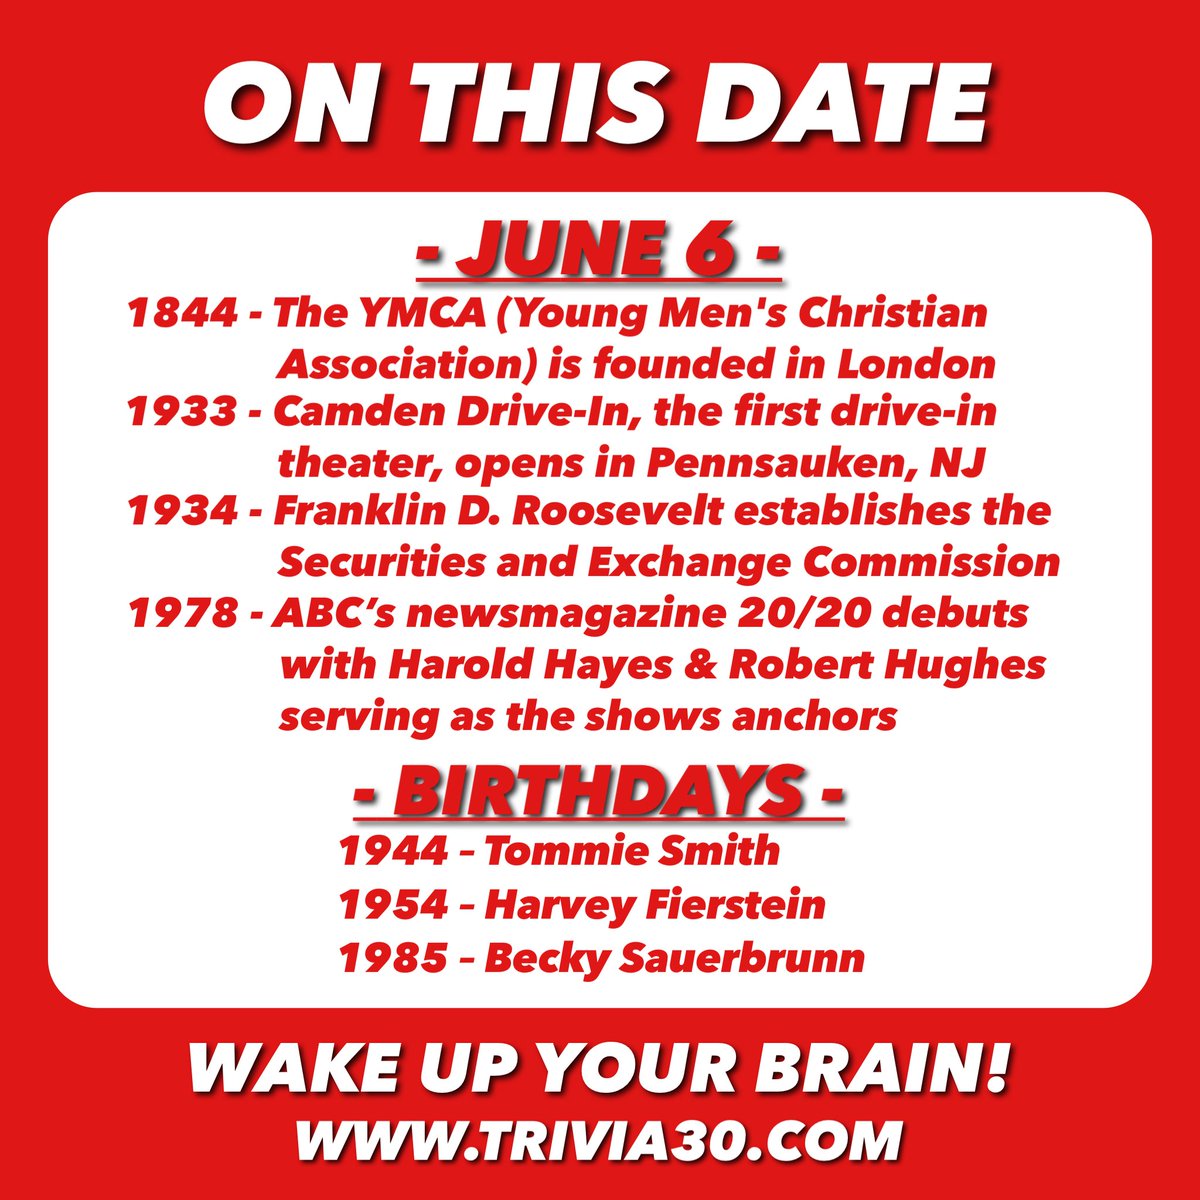 Your 6/6 OTD trivia. Join us for TRIVIA at The Sandbar, SJ Brewing, or Amelia National, or BINGO at Dick's Wings! #TRIVIA30 #WakeUpYourBrain #trivia #YMCA #London #DriveInTheater #NewJersey #FDR #SEC #ABC #2020 #TommieSmith #HarveyFierstein #BeckySauerbrunn #USWNT